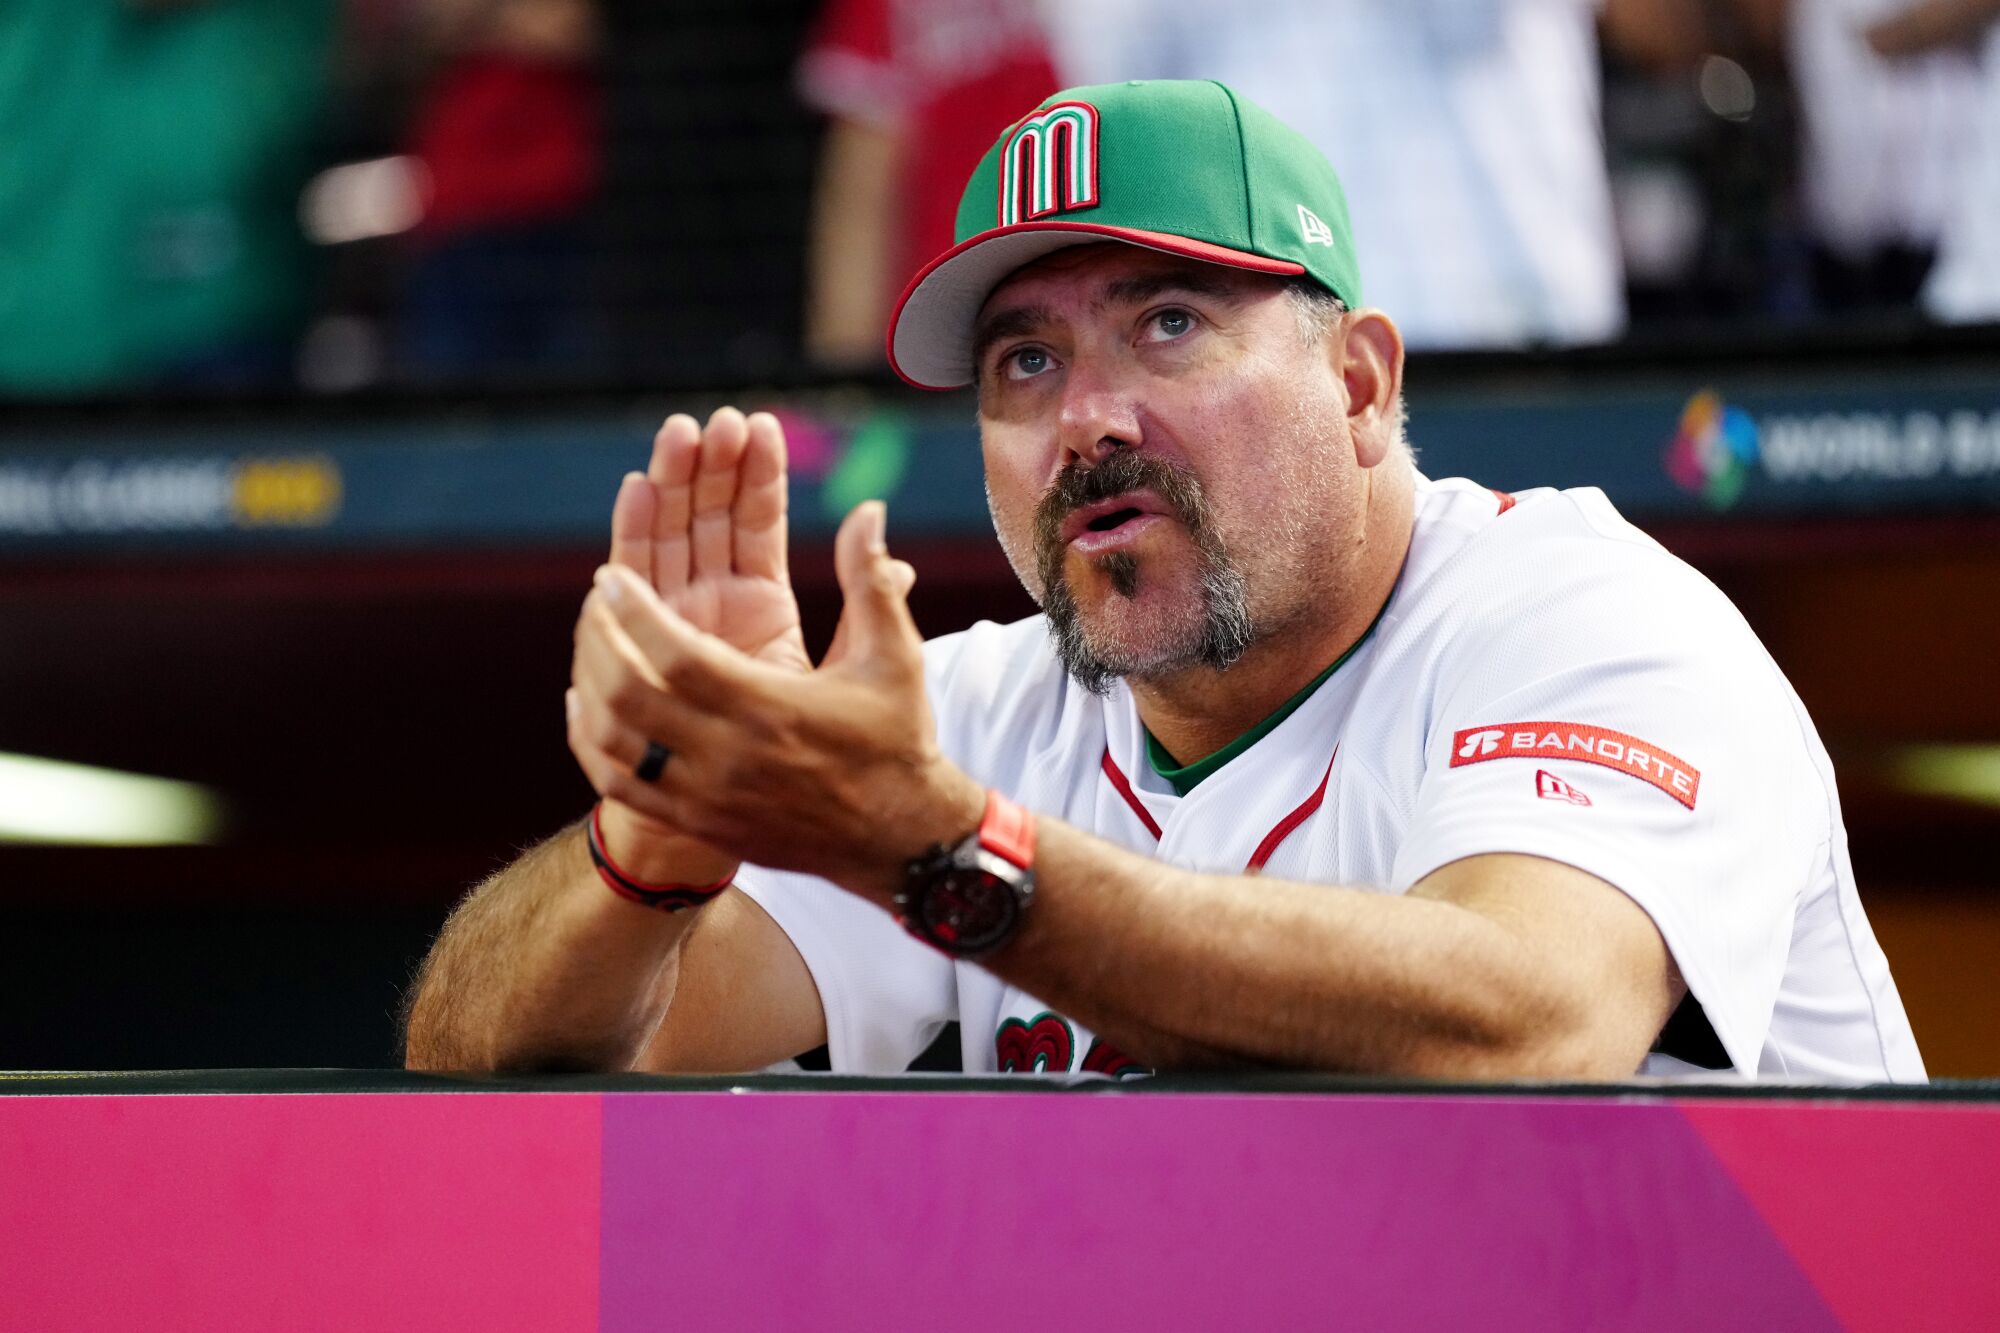 Mexico manager Benji Gil claps during a World Baseball Classic game against Colombia on March 11.